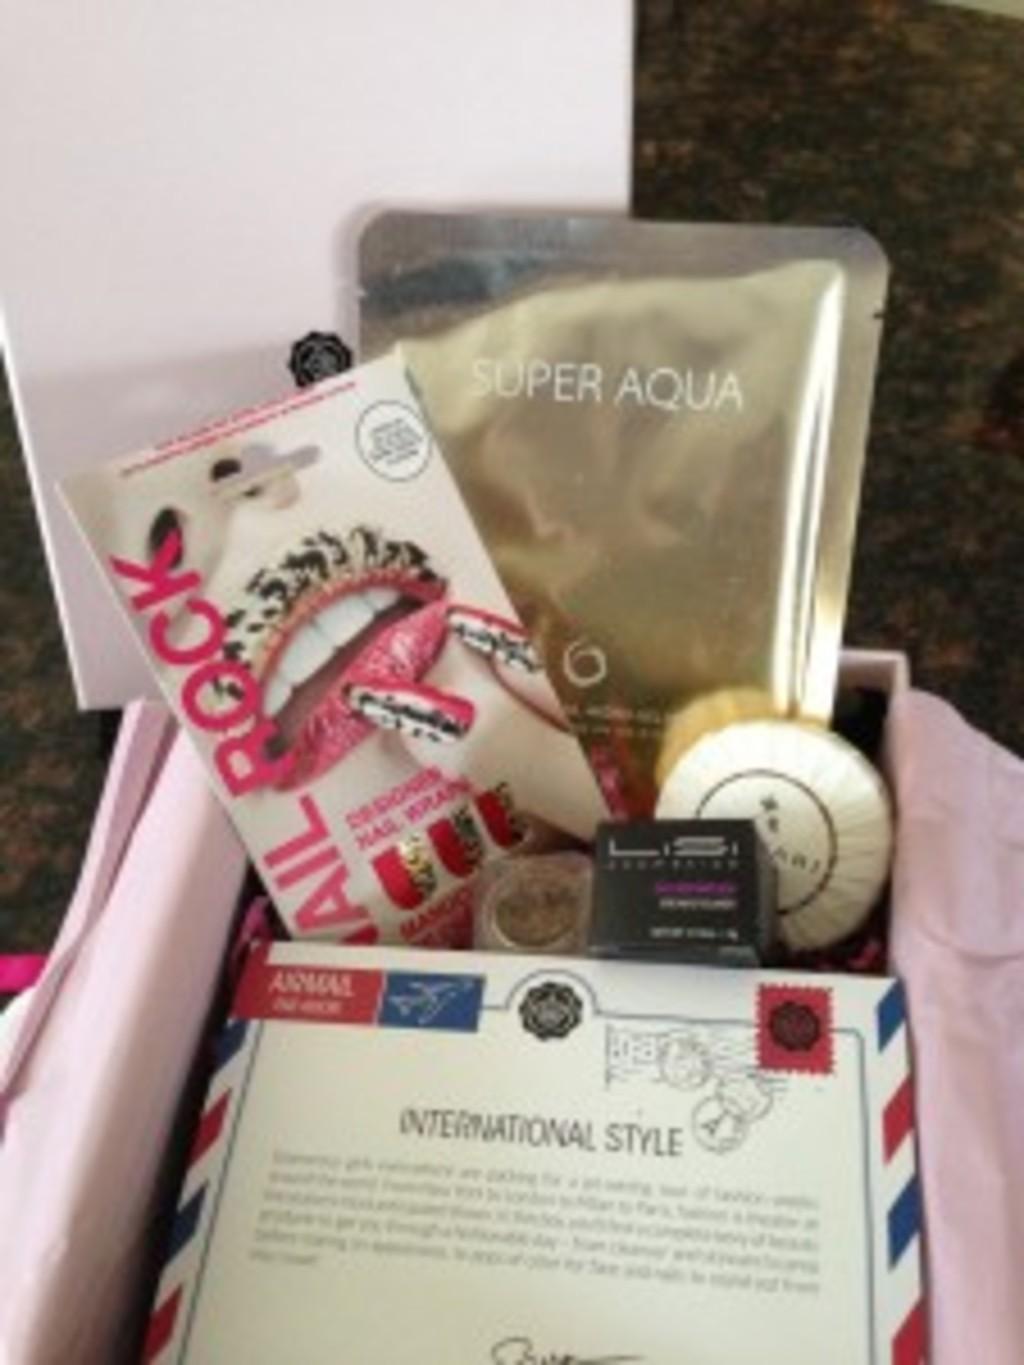 GLOSSYBOX Review + Coupon Code – February 2013